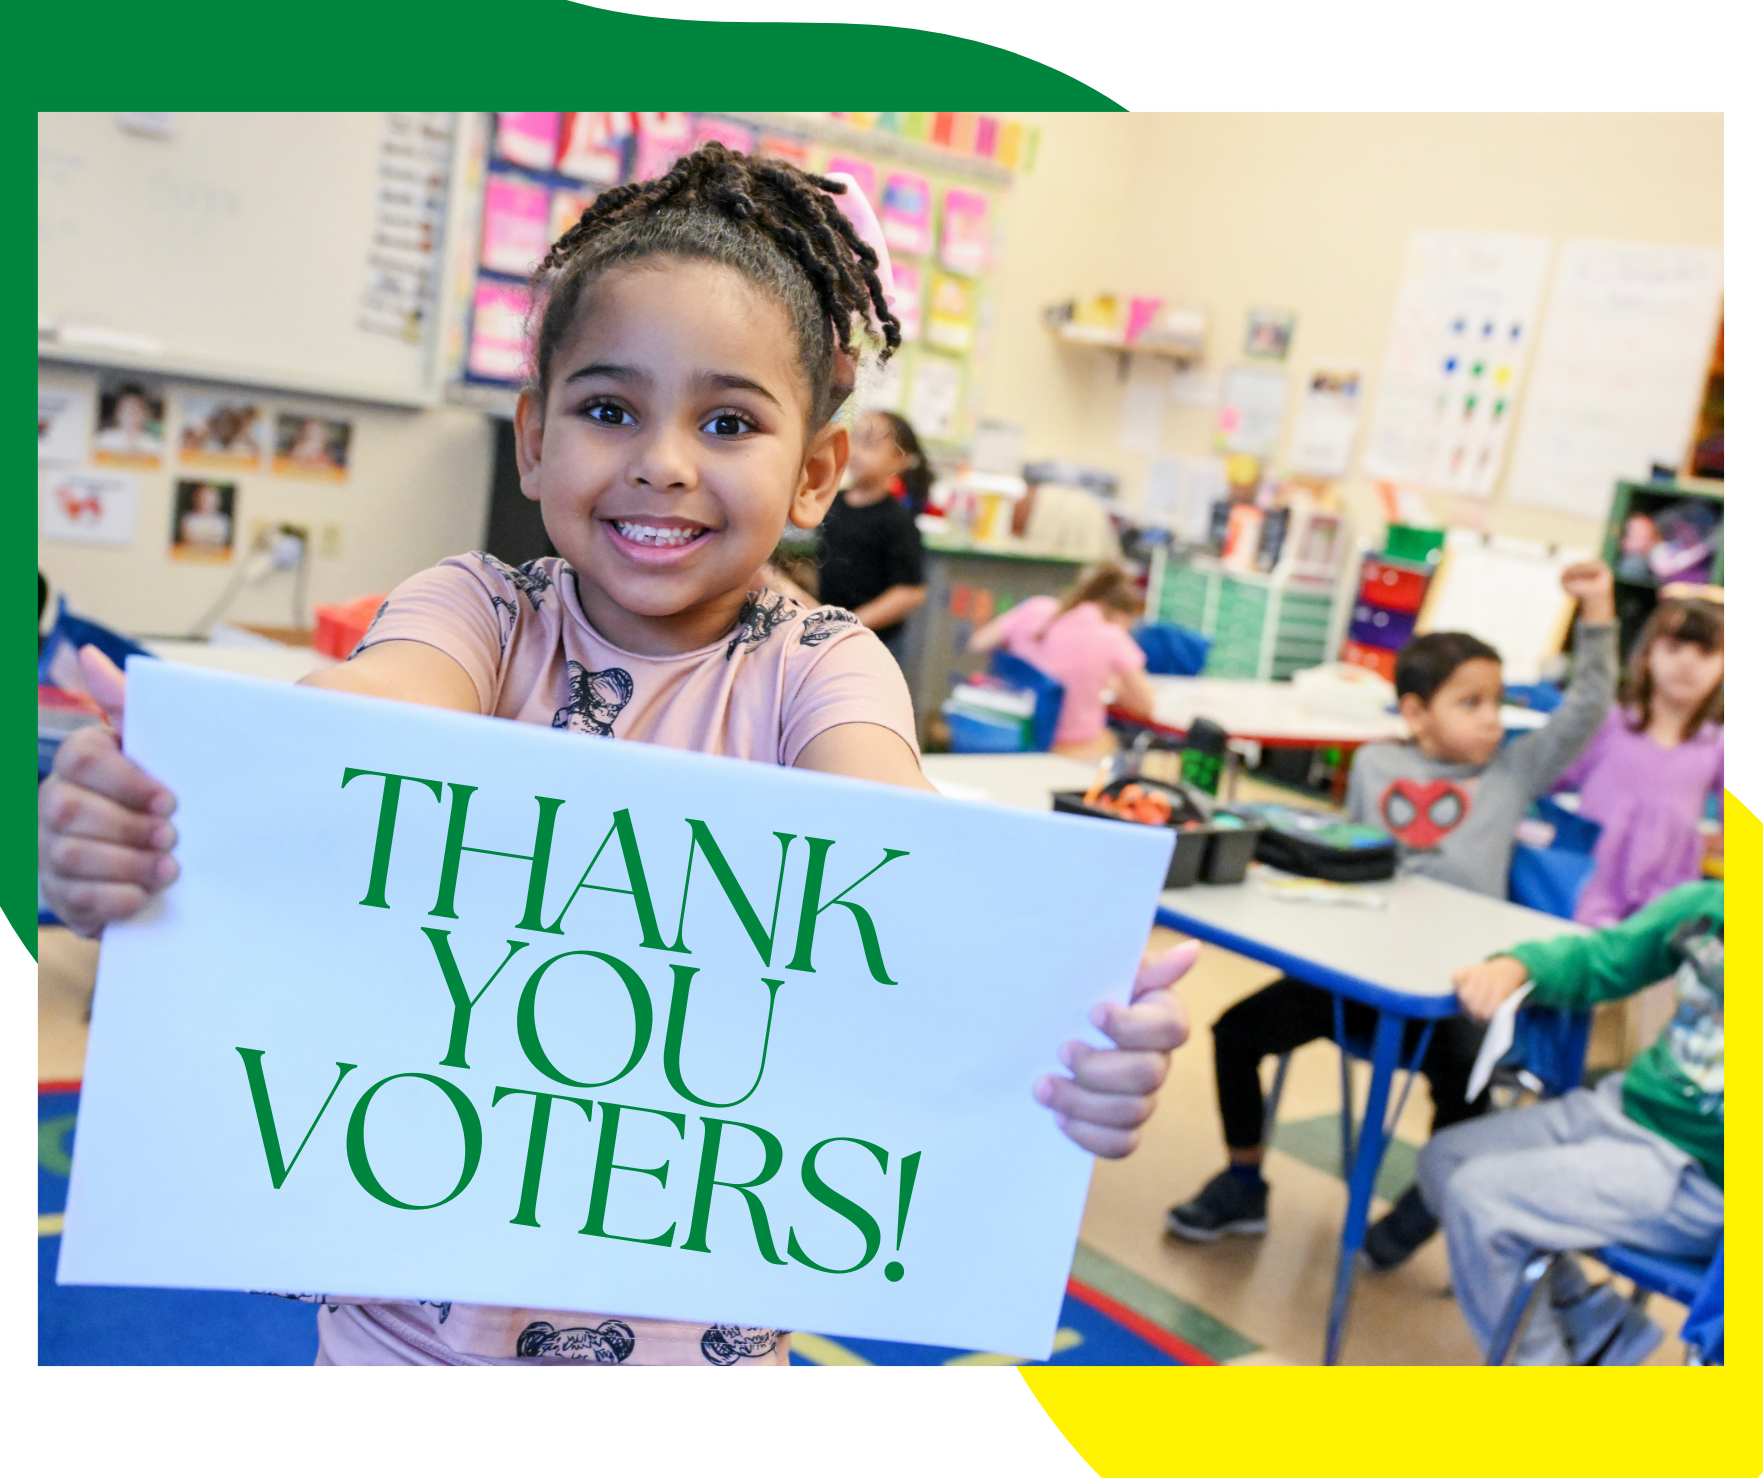 Child holds sign thanking voters